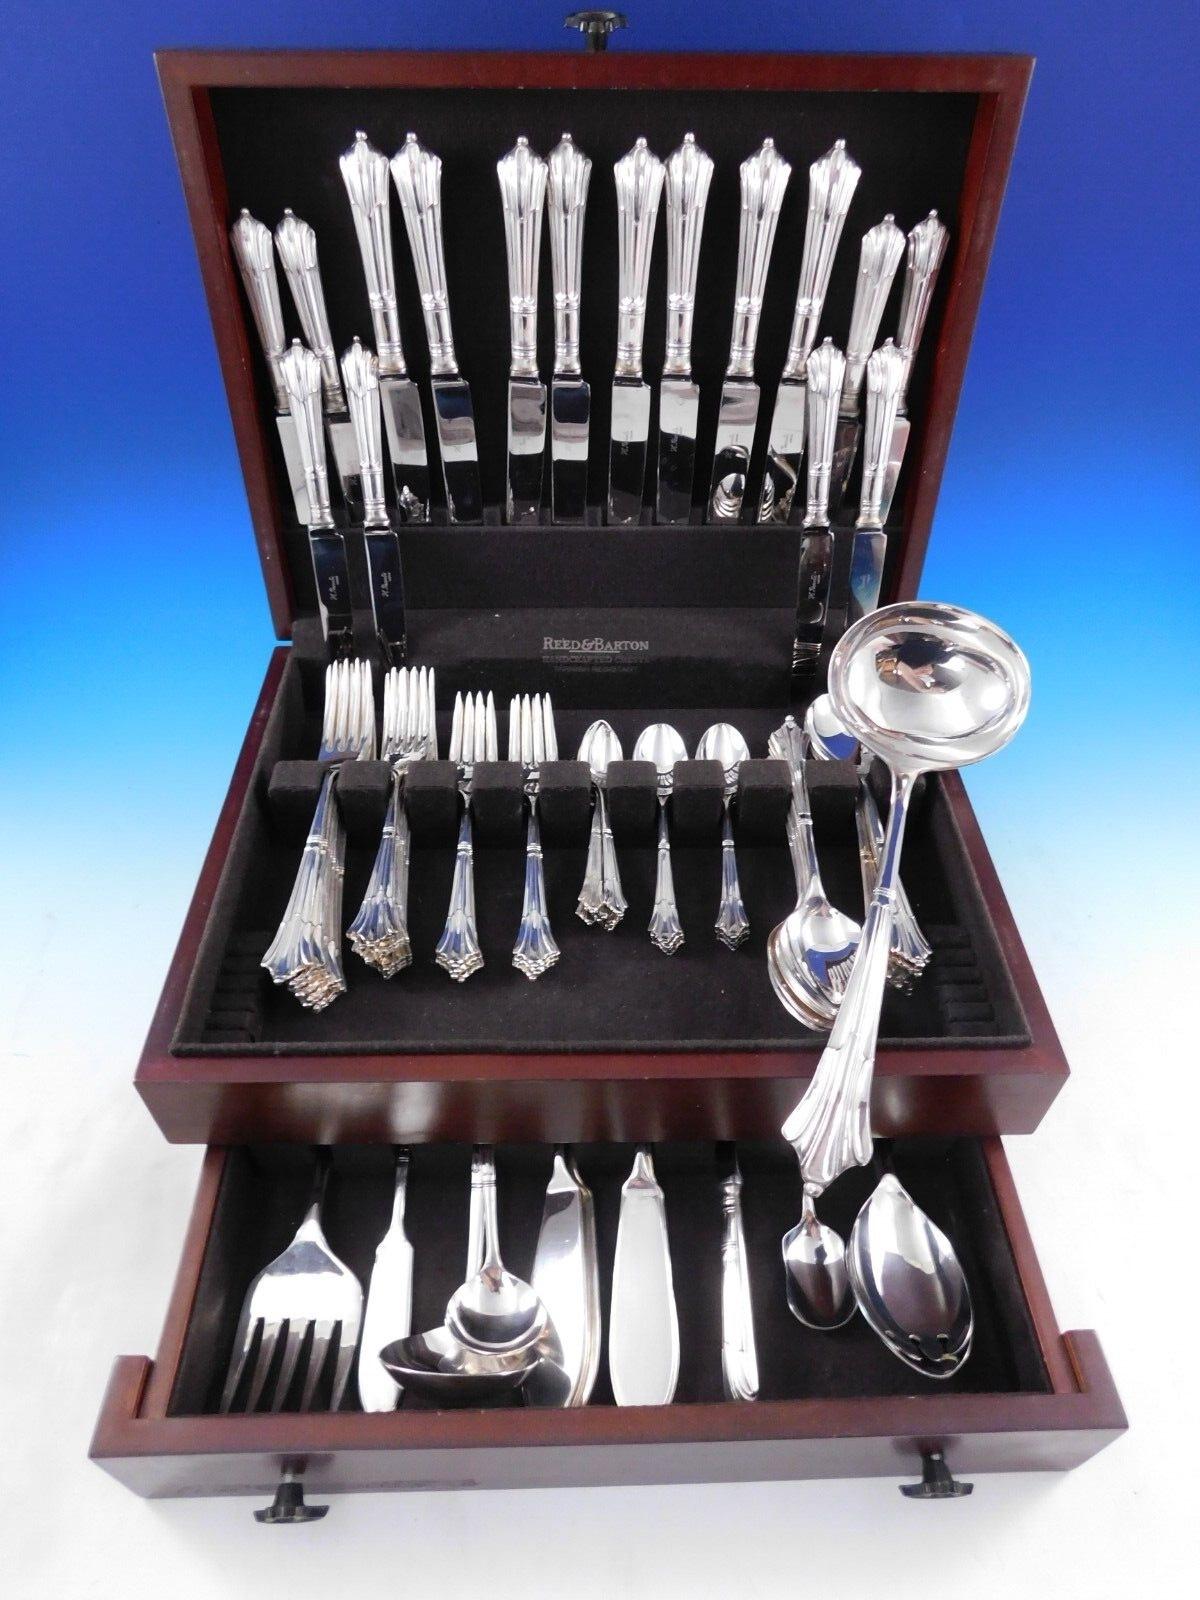 Albany by Arthur Price Silverplated Flatware Set Service for 8 Dinner 90 pieces For Sale 5